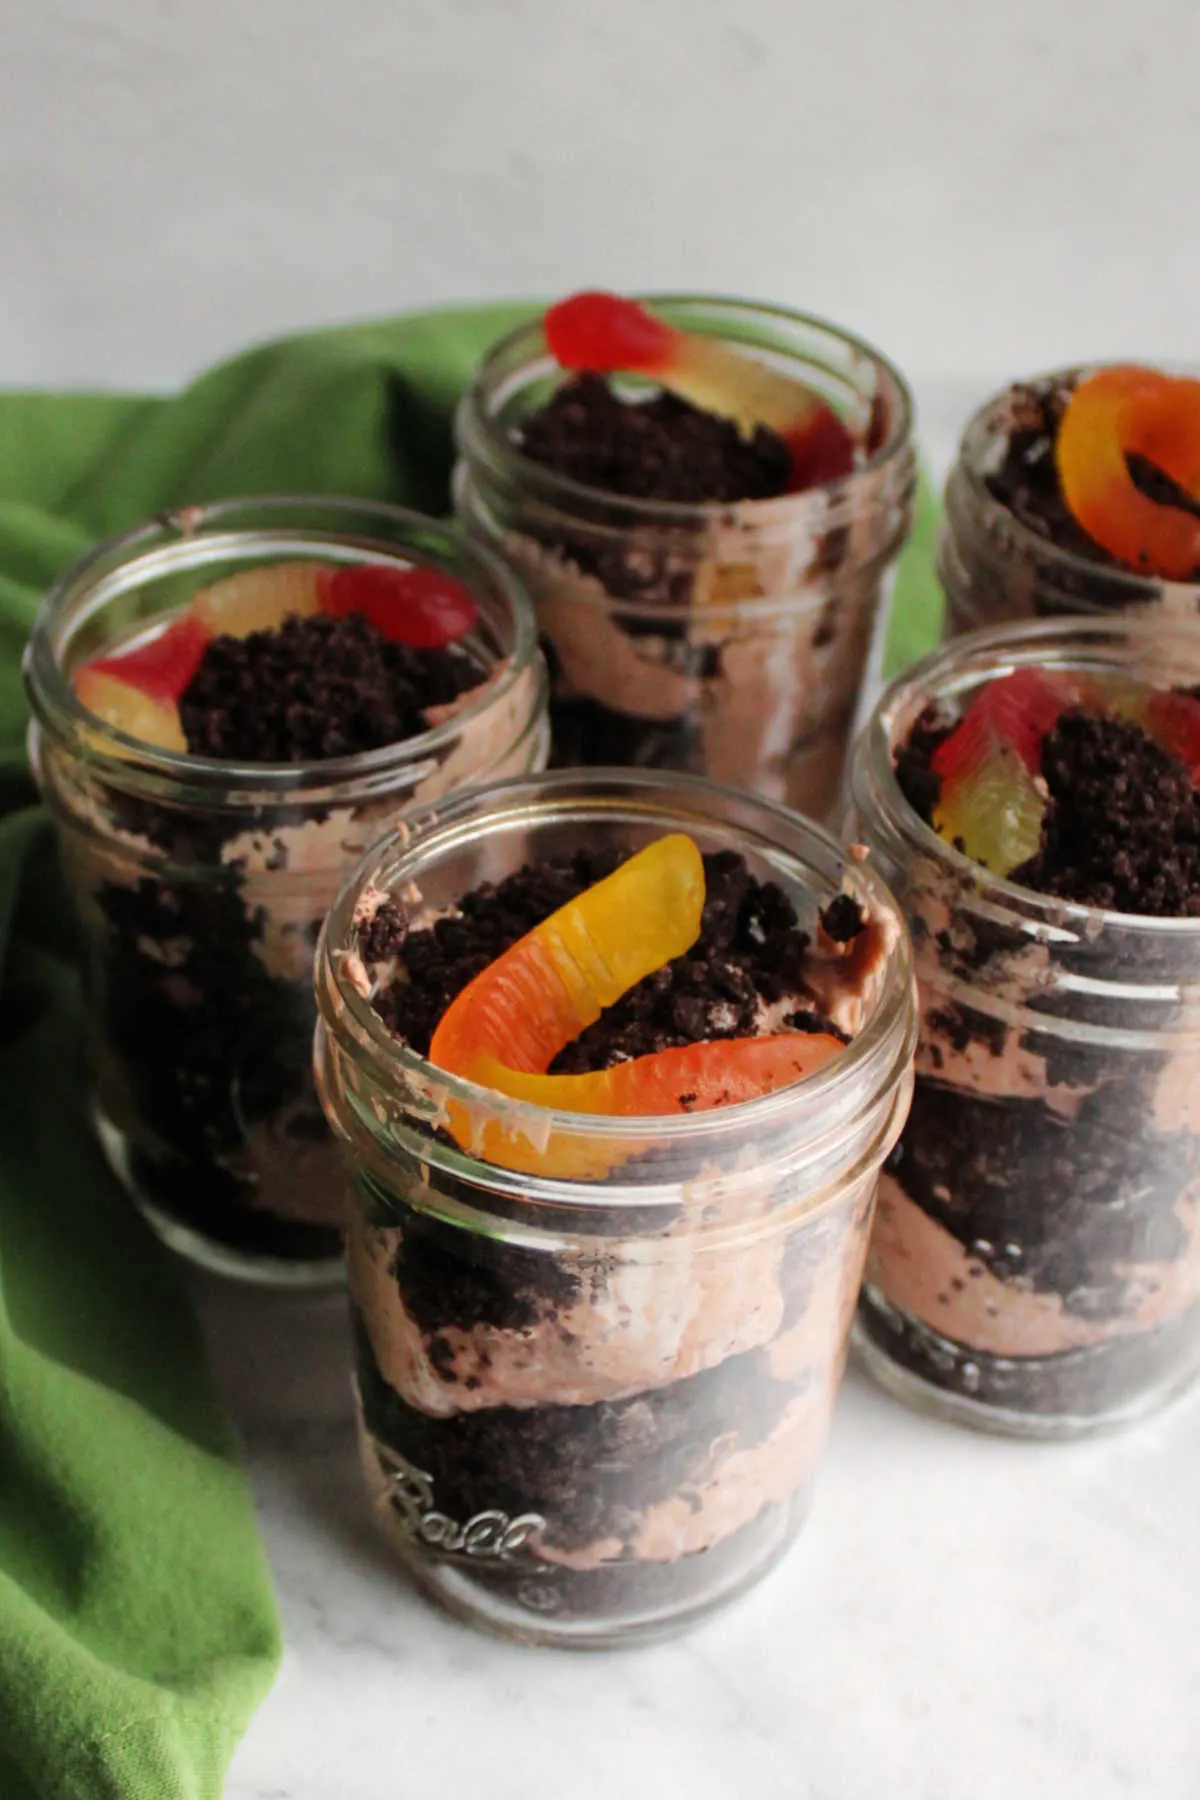 Jars of dirt pudding with layers of Oreo crumbs, chocolate pudding mixture and a gummy worm on top.